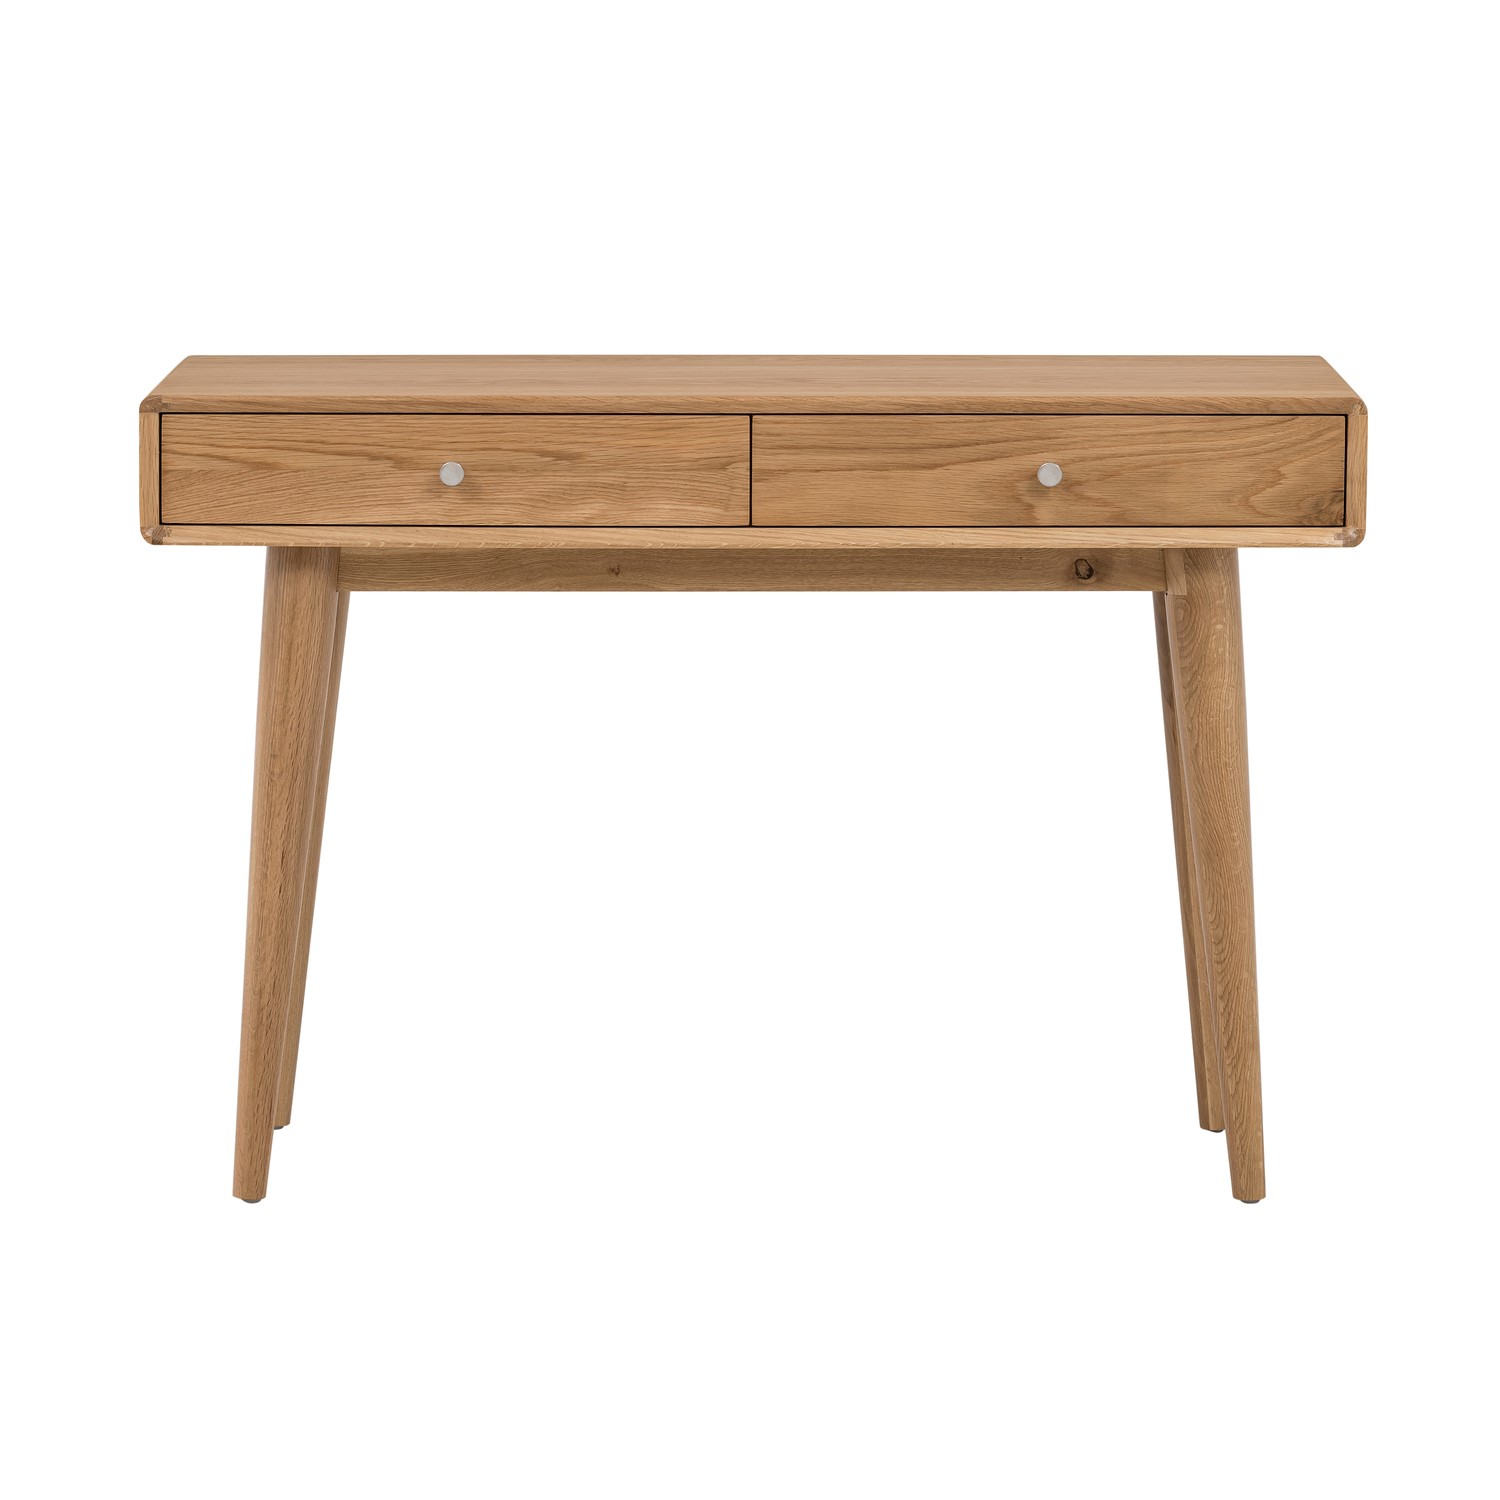 Photo of Oak console table with 2 drawers - jenson